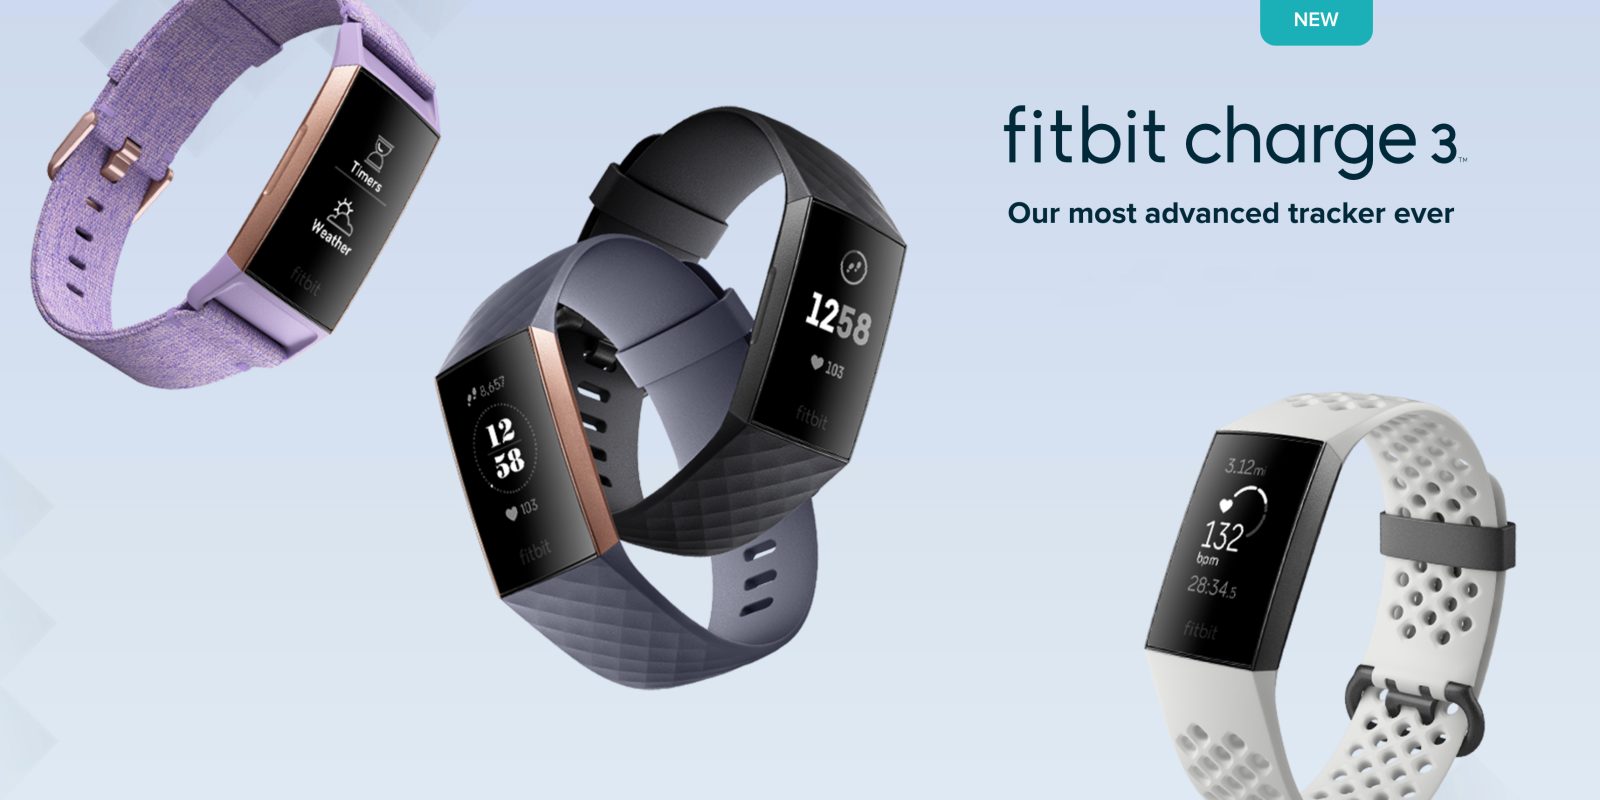 Fitbit Charge 3, Fitbit